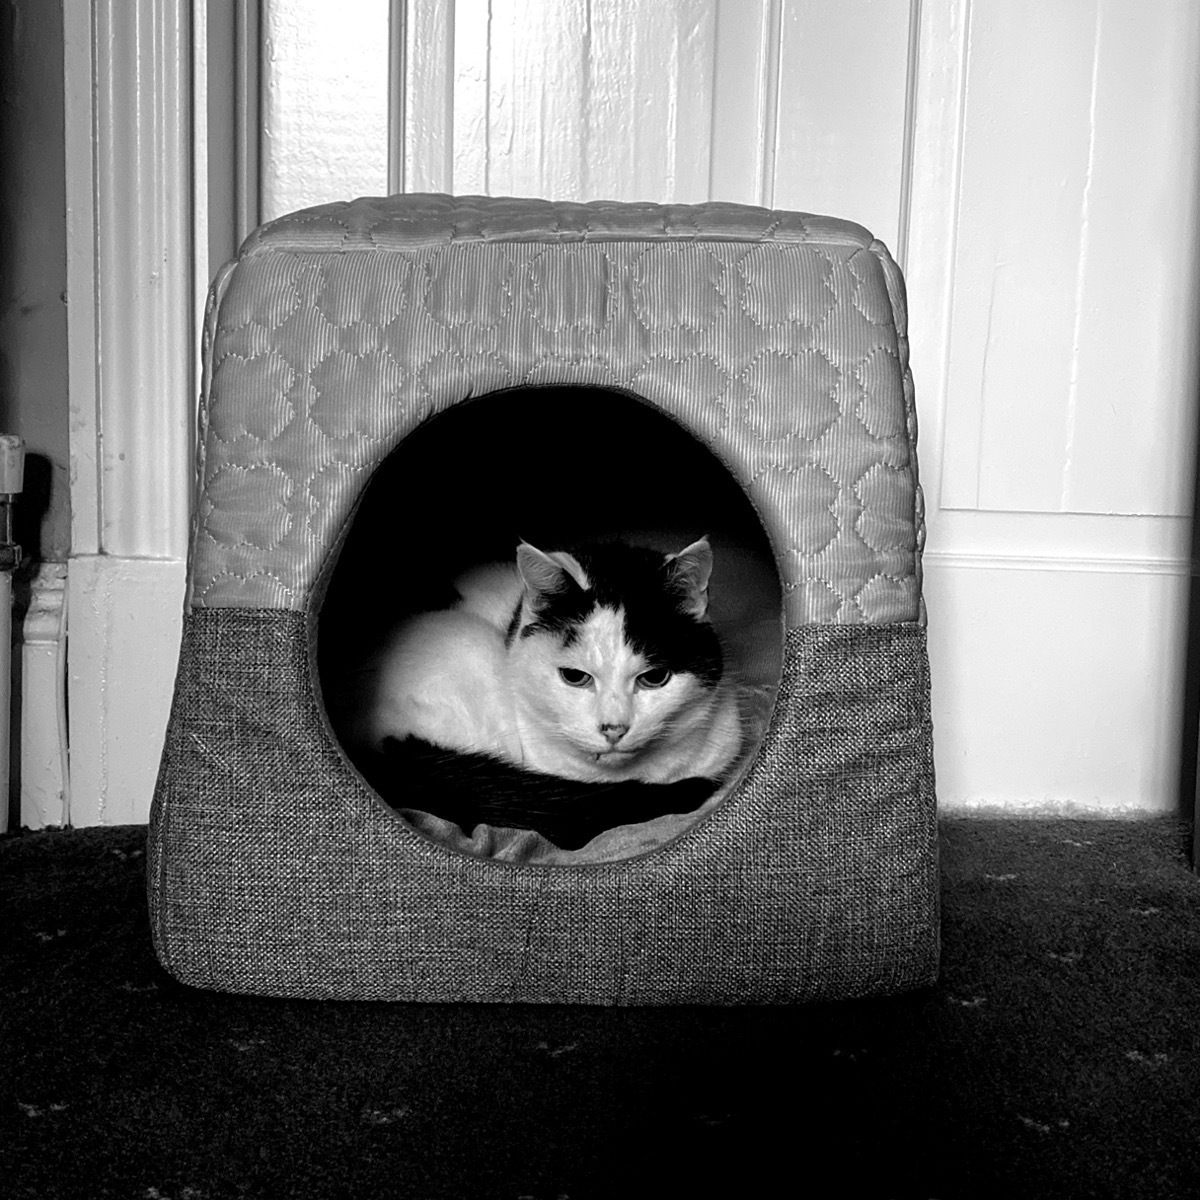 Monochrome image of black and white cat curled up in and looking out from an enclosed cat bed